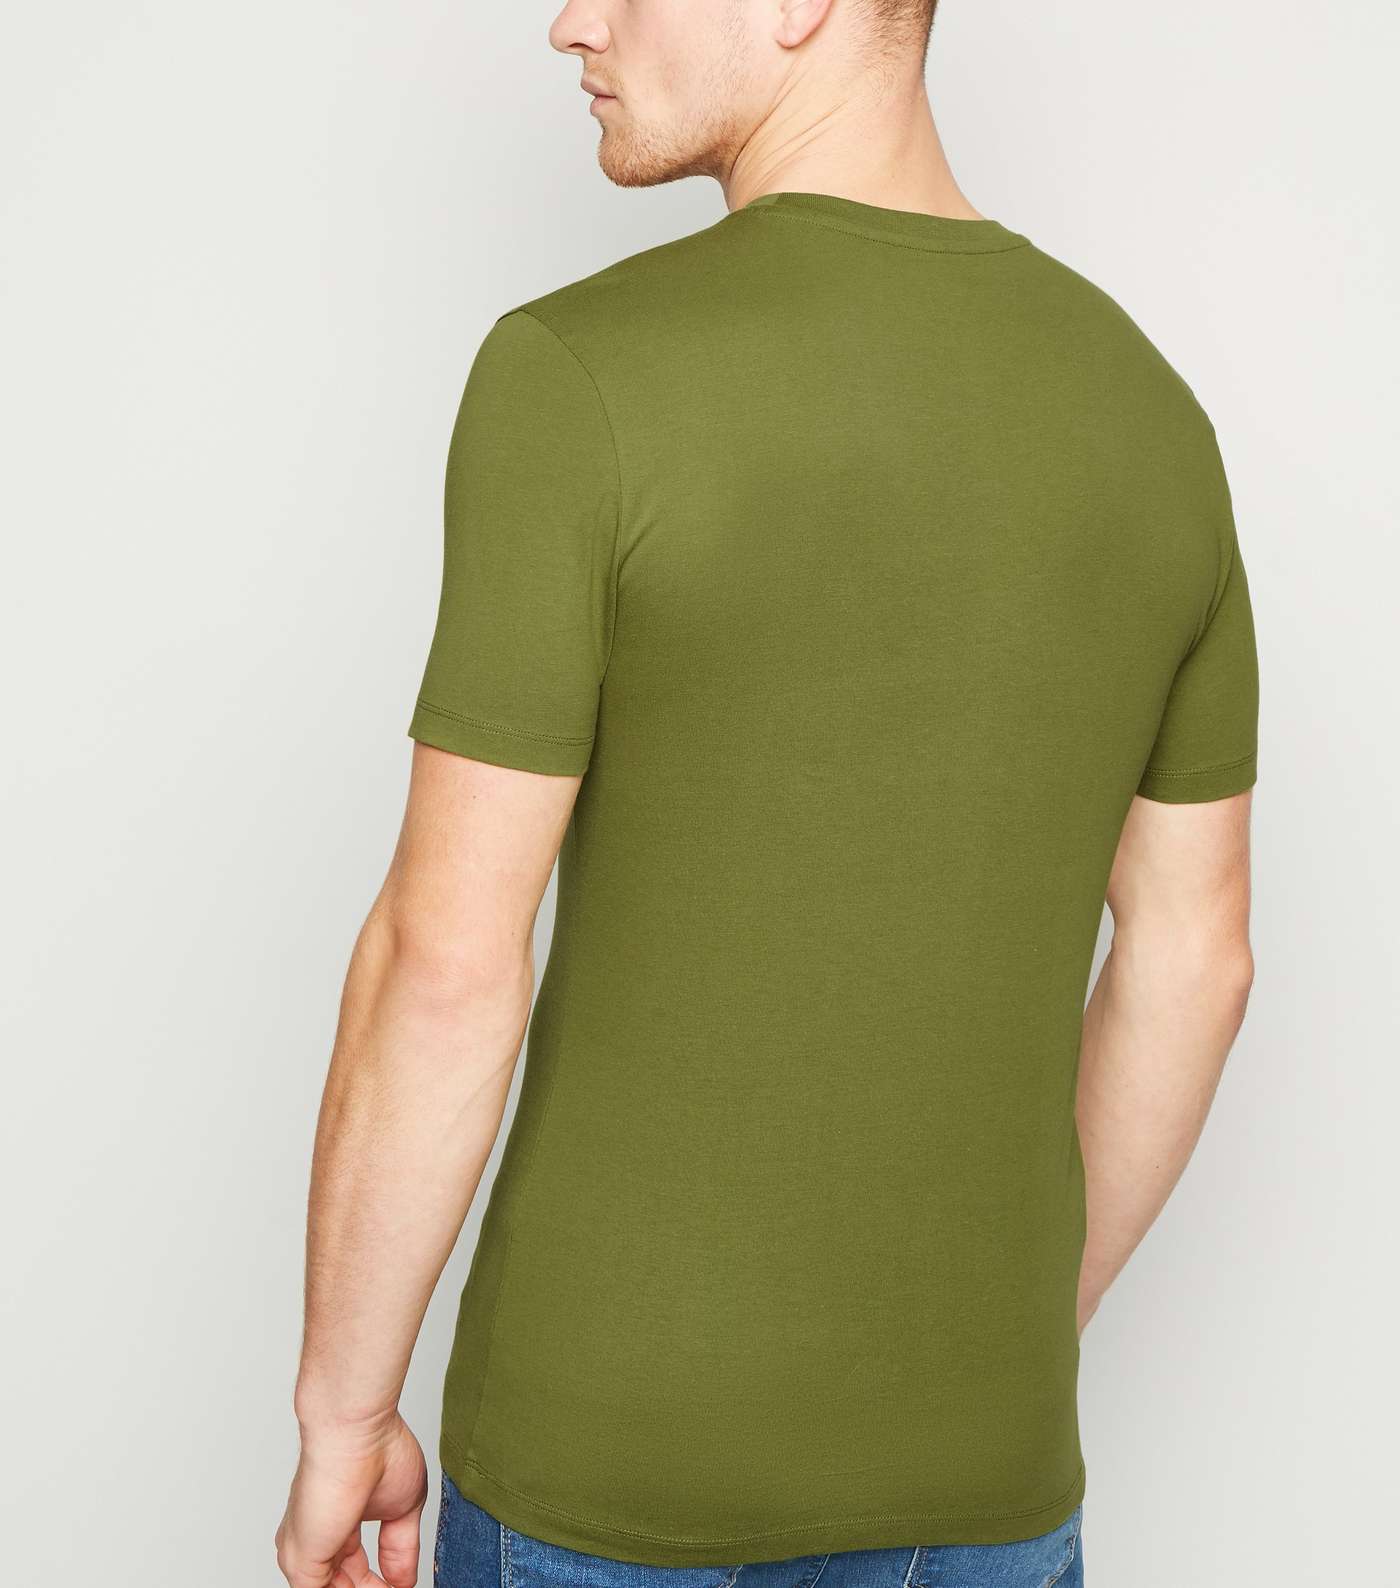 Green Muscle Fit Cotton T-Shirt Image 3